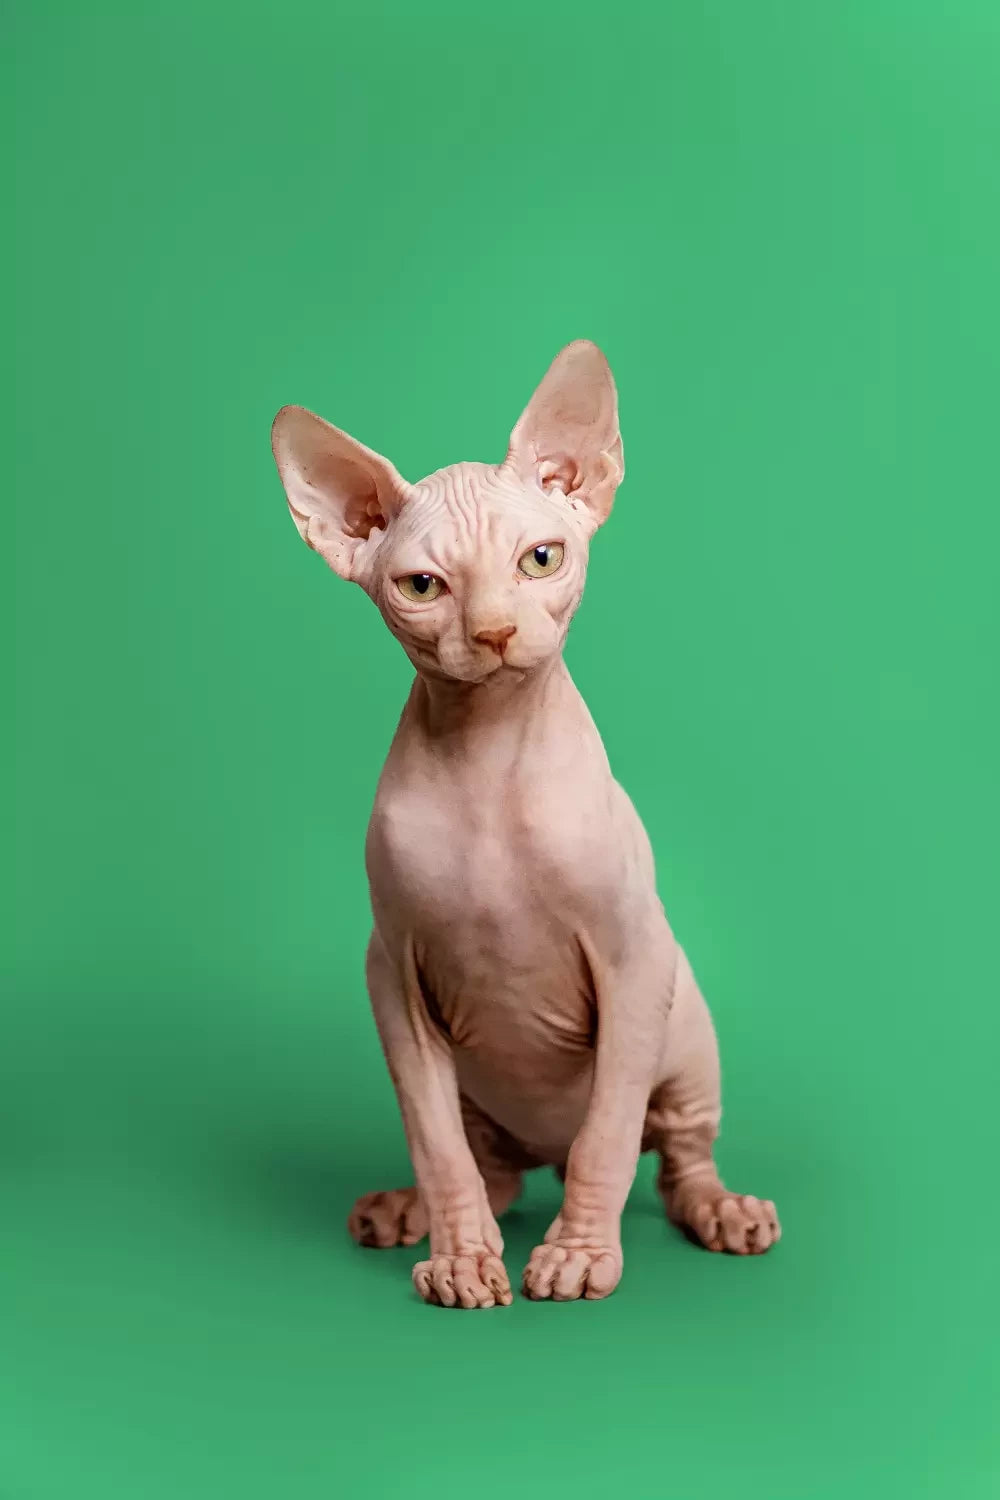 Sphynx Cat Meows and Communication: What They Mean